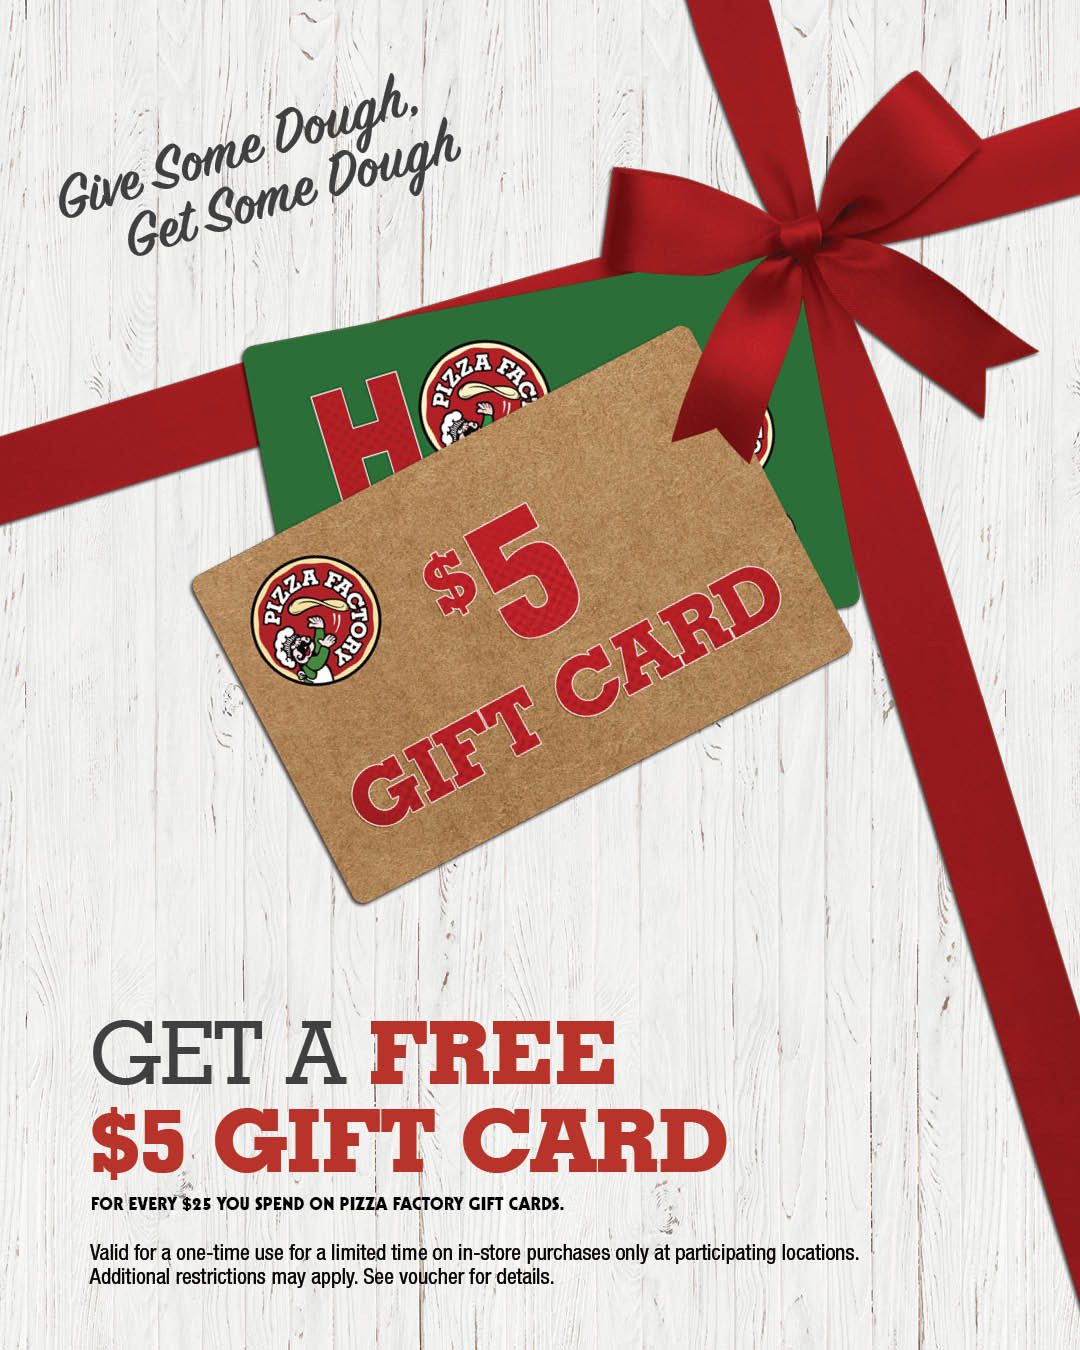 Pizza Factory Christmas Spend $25 Gift Cards, Get Free $5 Gift Card